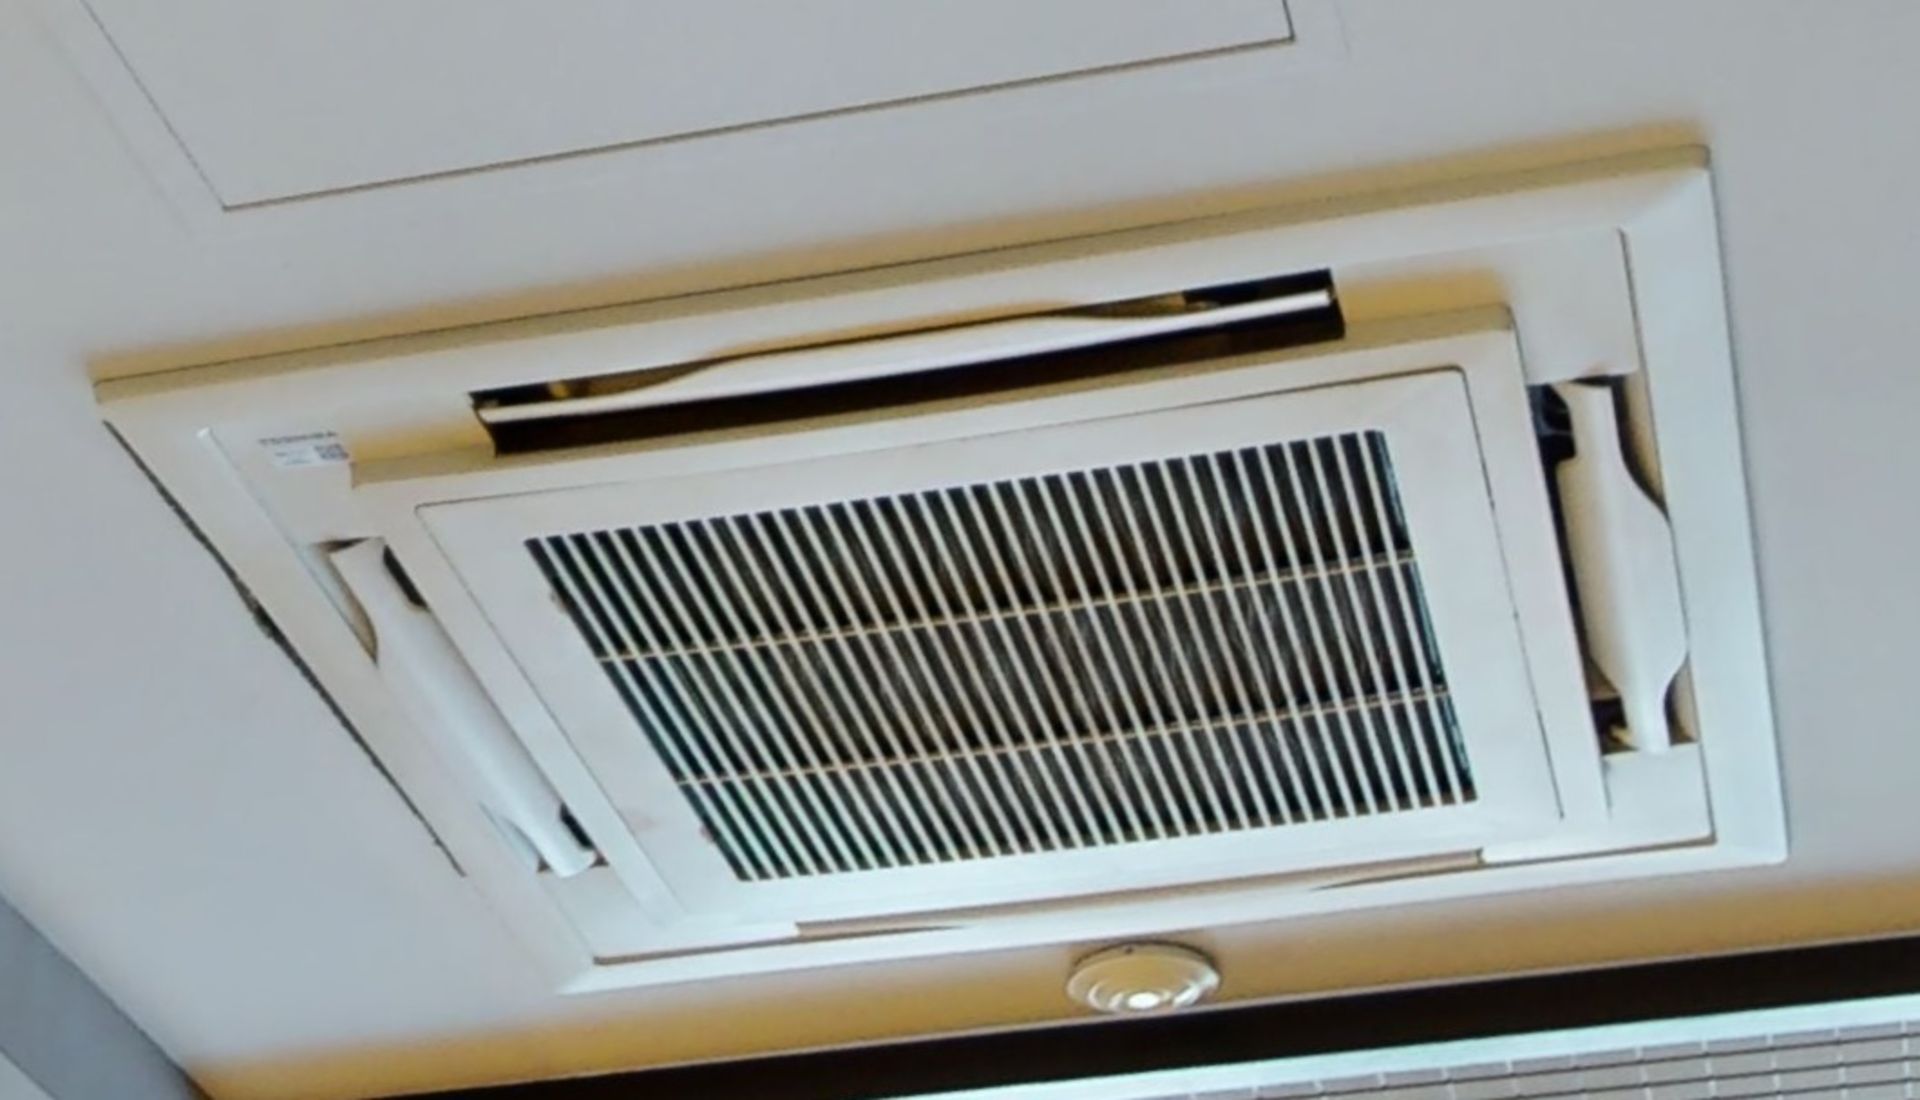 1 x Toshiba Air Conditioning System - Includes 3 x Indoor Cassettes and 3 x Outdoor Condensers - Image 2 of 5